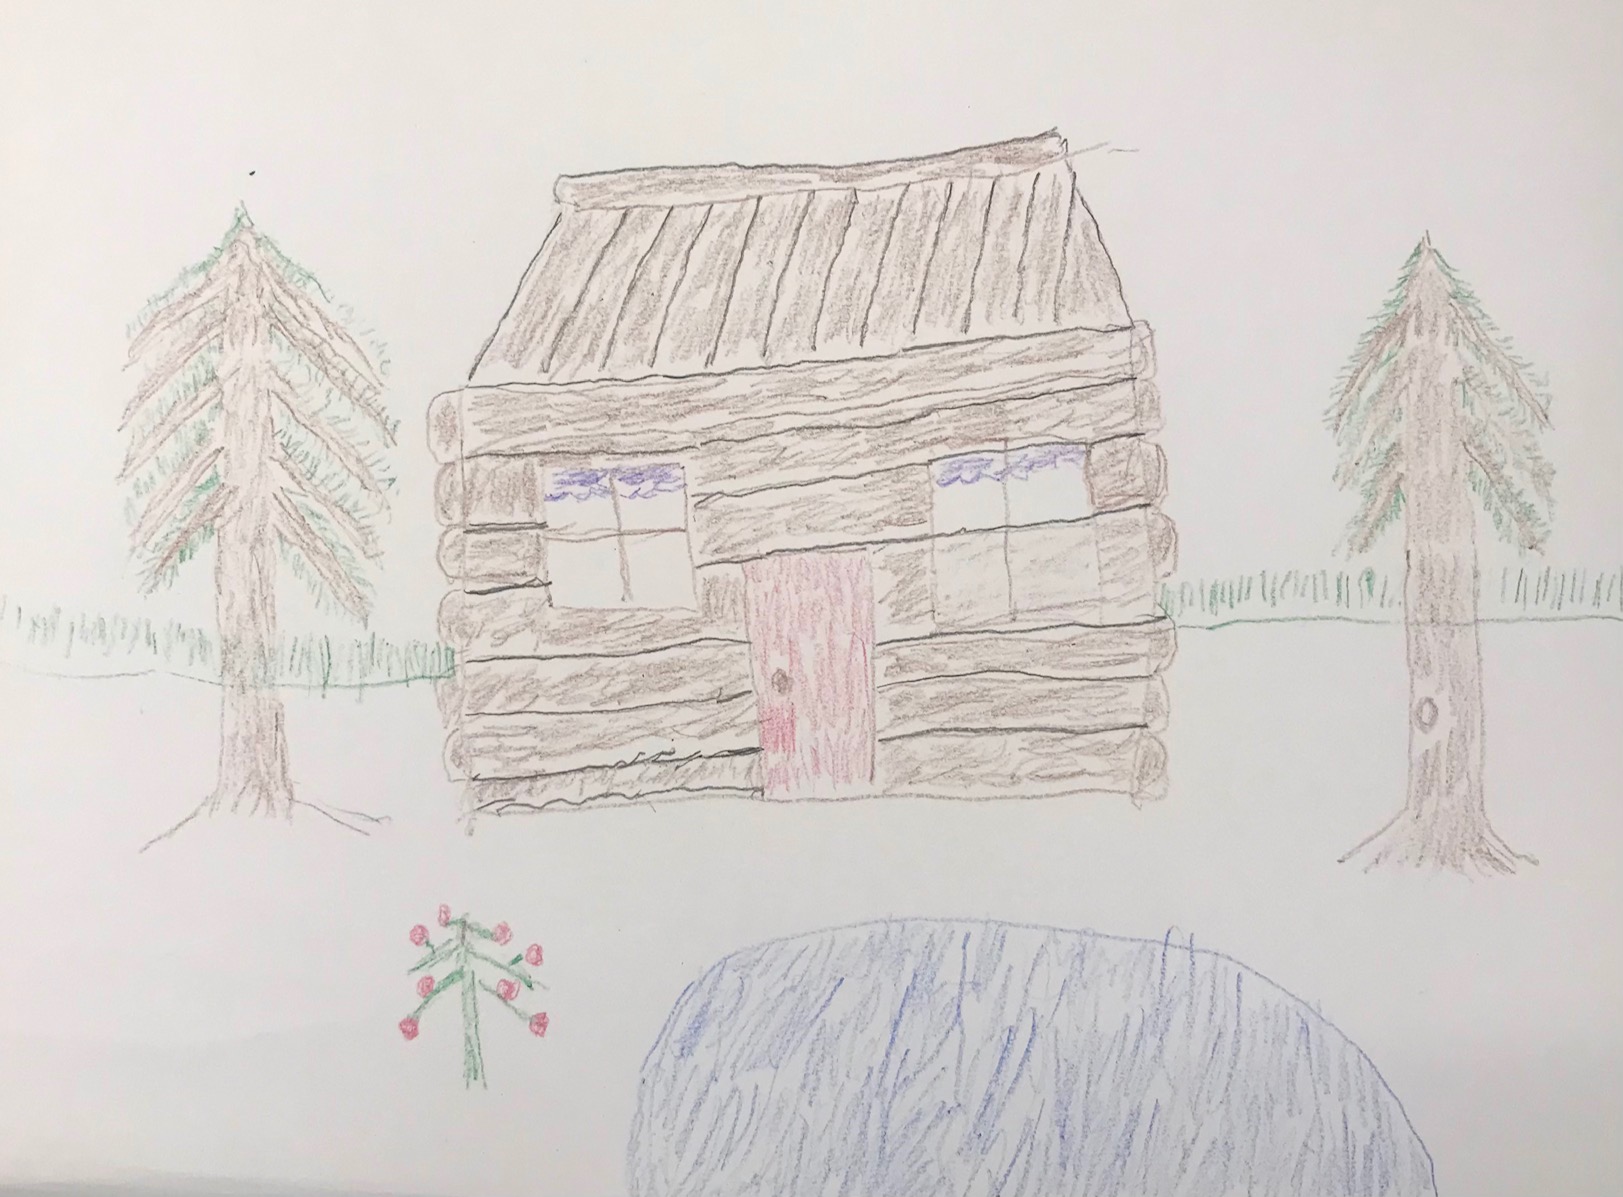 "A drawing of a log cabin home in a grassy grove with pine trees"